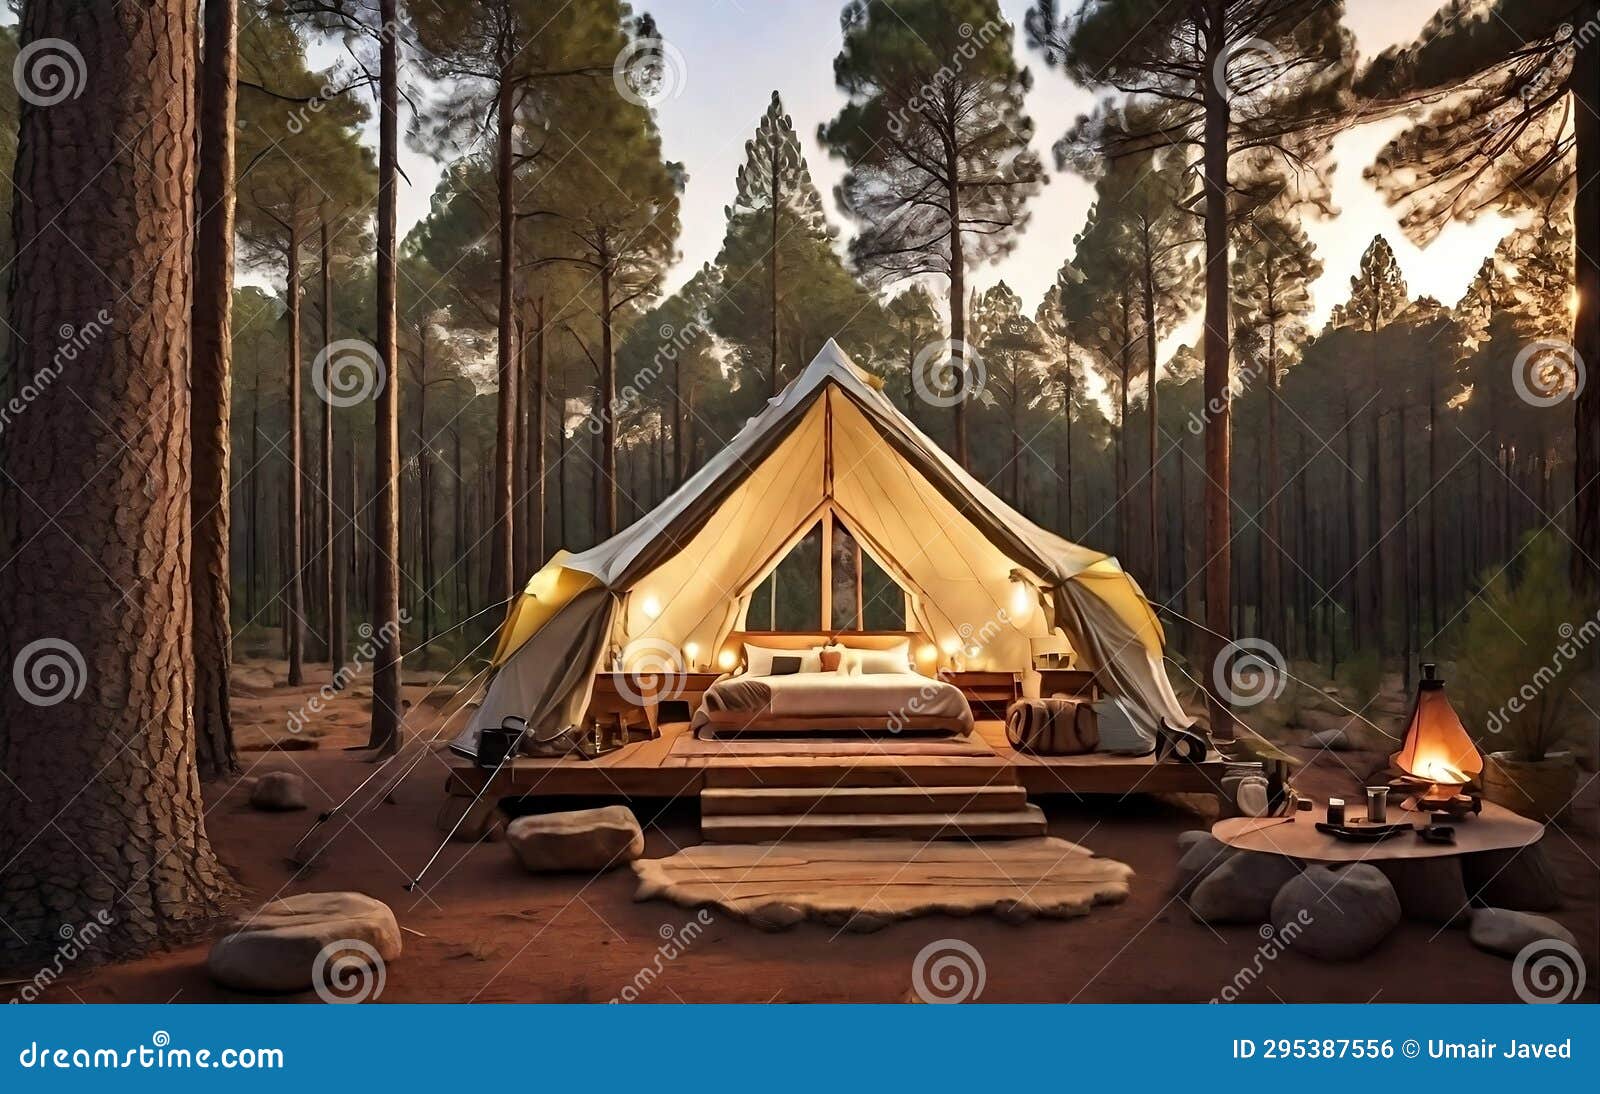 tent in the pine forest retreat as the sun sets, a cozy luxuries camping tent